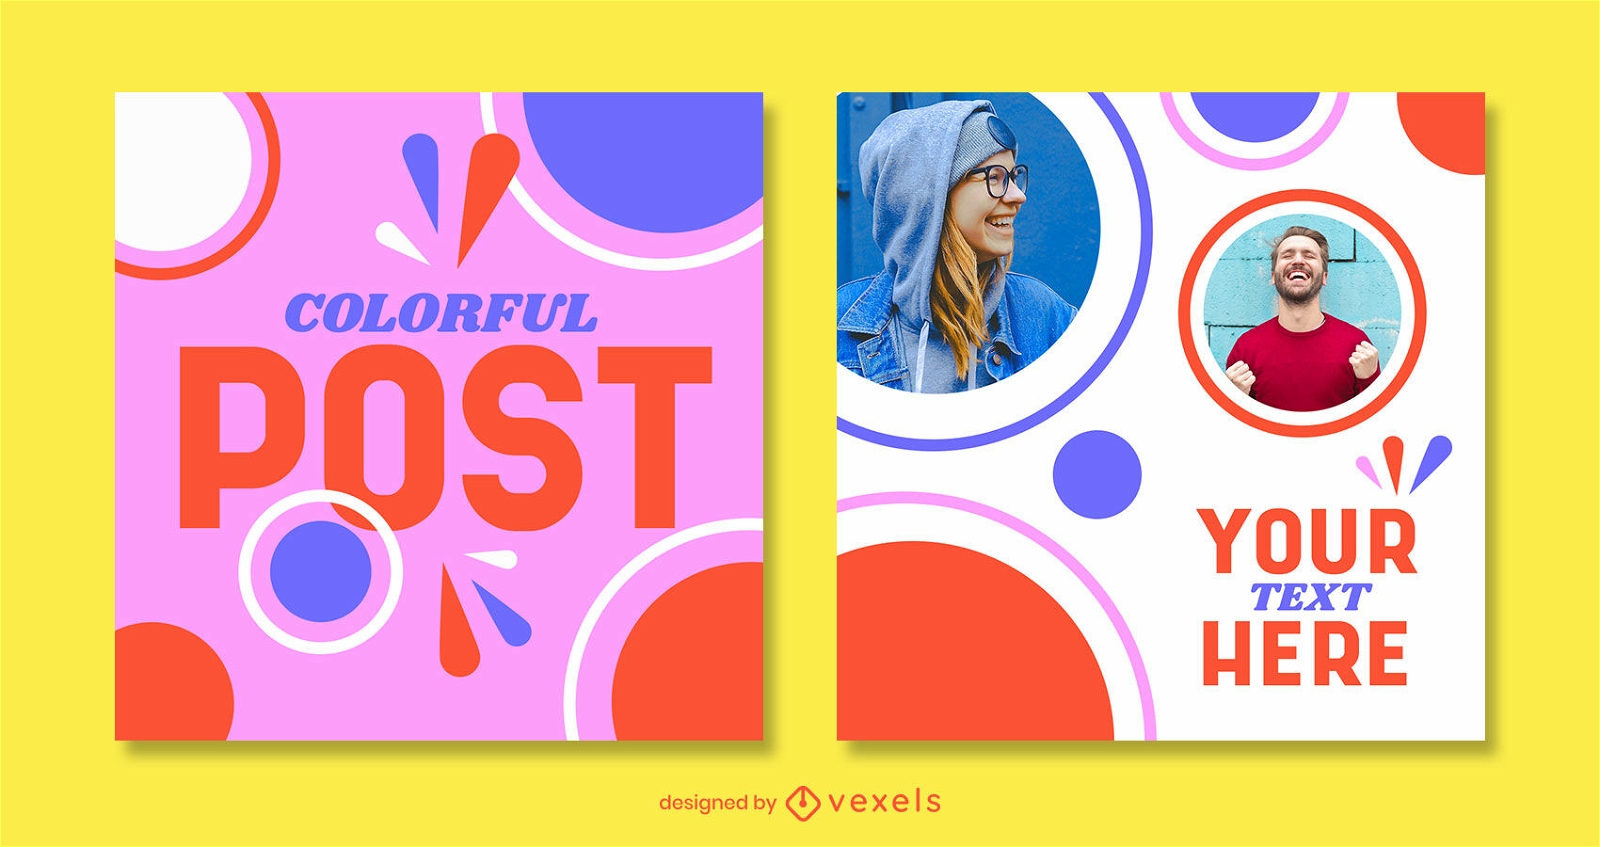 Instagram post template retro colorful shapes